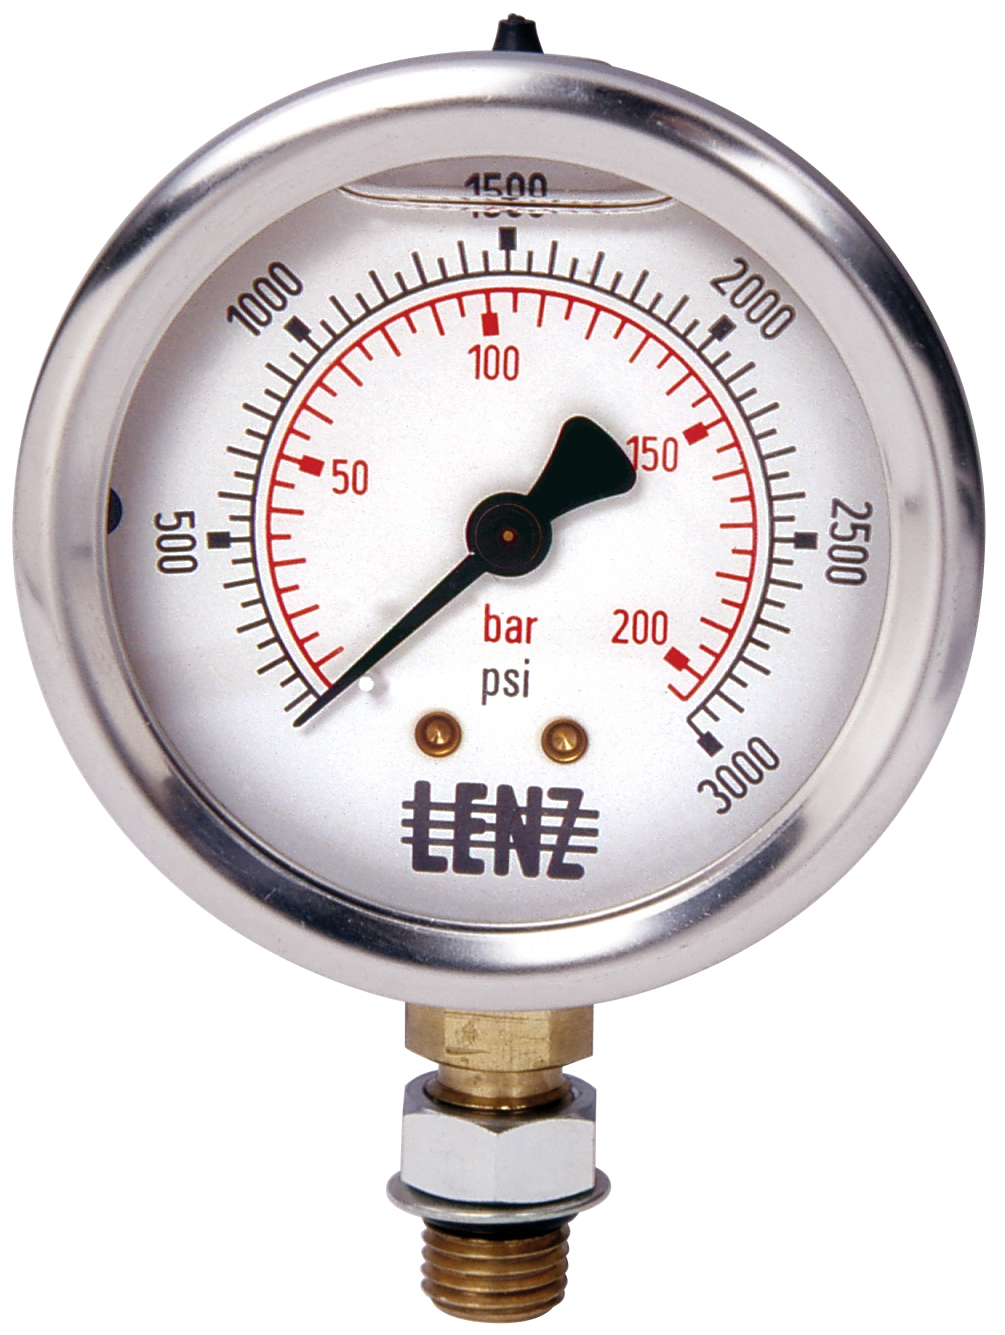 Stainless Steel Bezel 30/0 hg Vacuum psi Range Center Back Mount Dry Pressure Gauge with a Stainless Steel Case and Internals 1/4 Male NPT Connection Size and Polycarbonate Lens PIC Gauge 302D-204A 2 Dial 